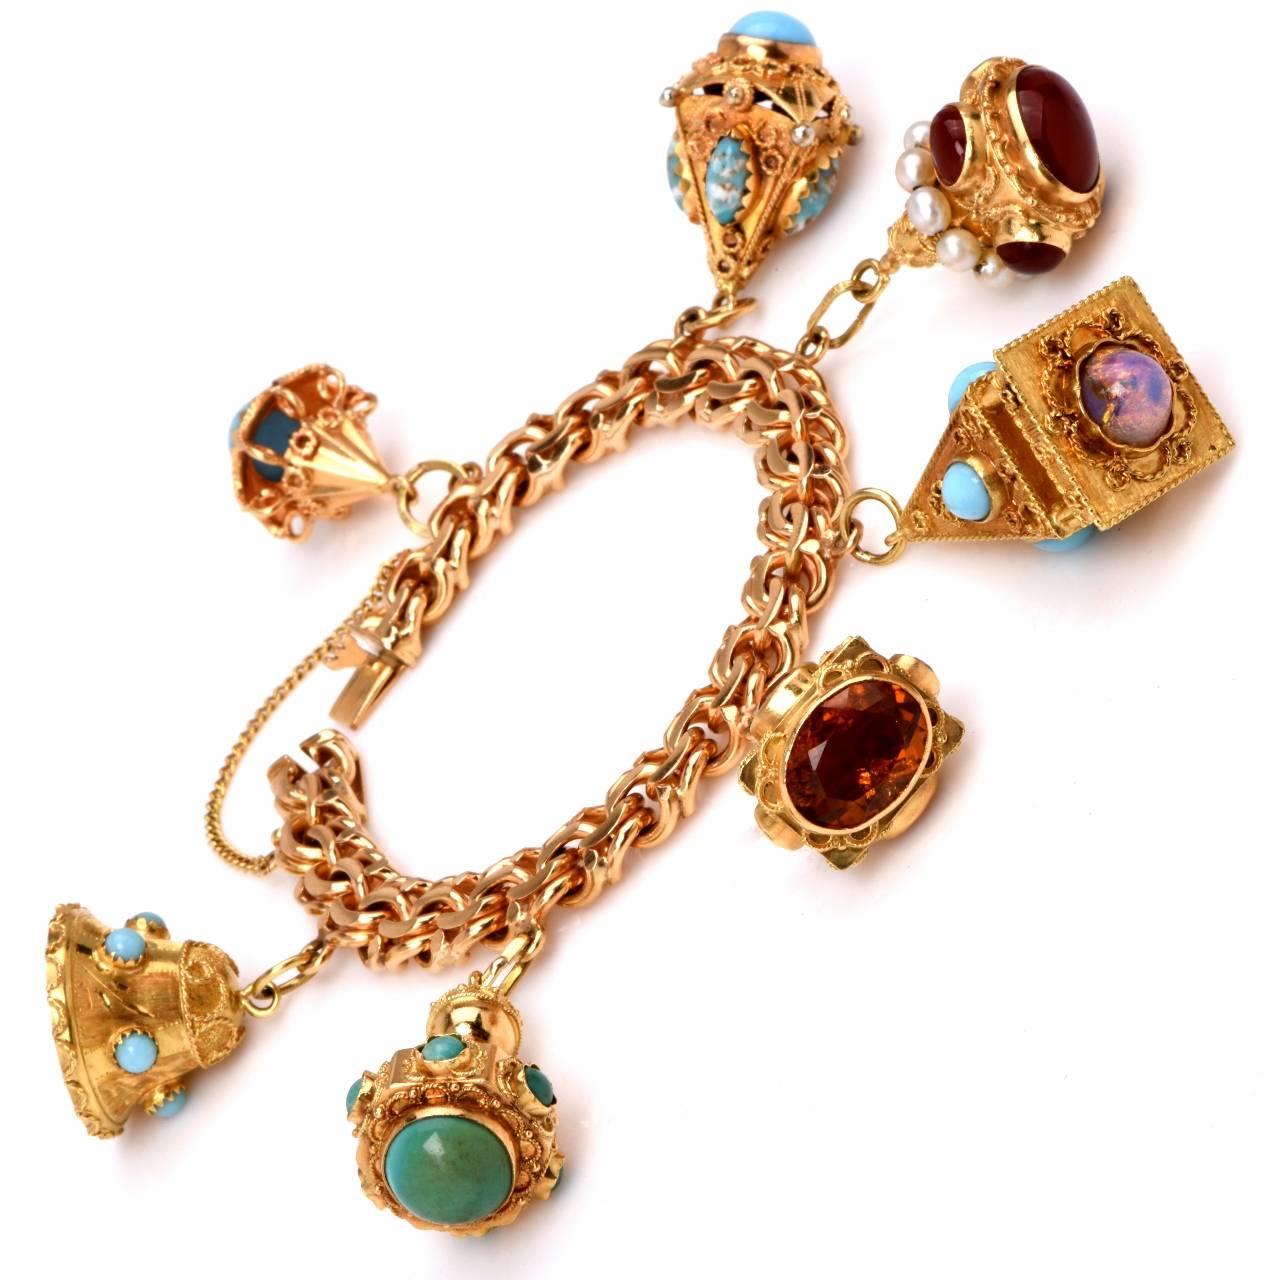 This impressive vintage multi-gem flexible chain link bracelet is handcrafted in 18K yellow gold, weighing approx: 119.7 grams and measuring approx: 6